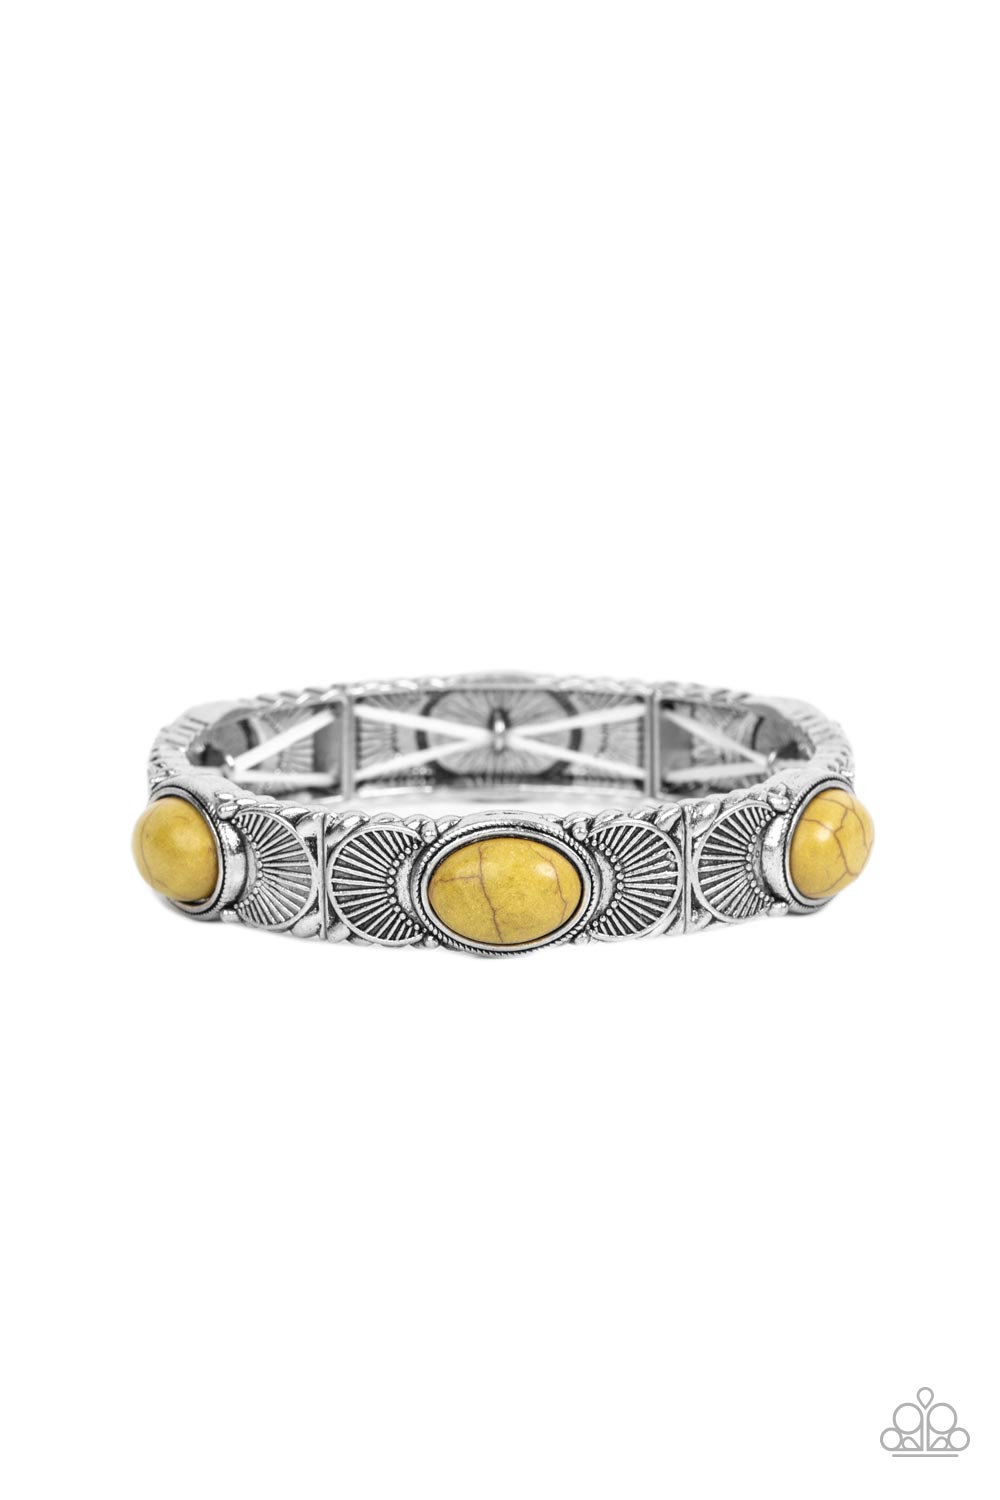 ​Desert Skyline - Yellow Stone - Silver Bracelet - Paparazzi Accessories - 
Flanked by silver half moon accents, Willow stone dotted silver frames are threaded along stretchy bands around the wrist for a rustic flair. Sold as one individual bracelet.
